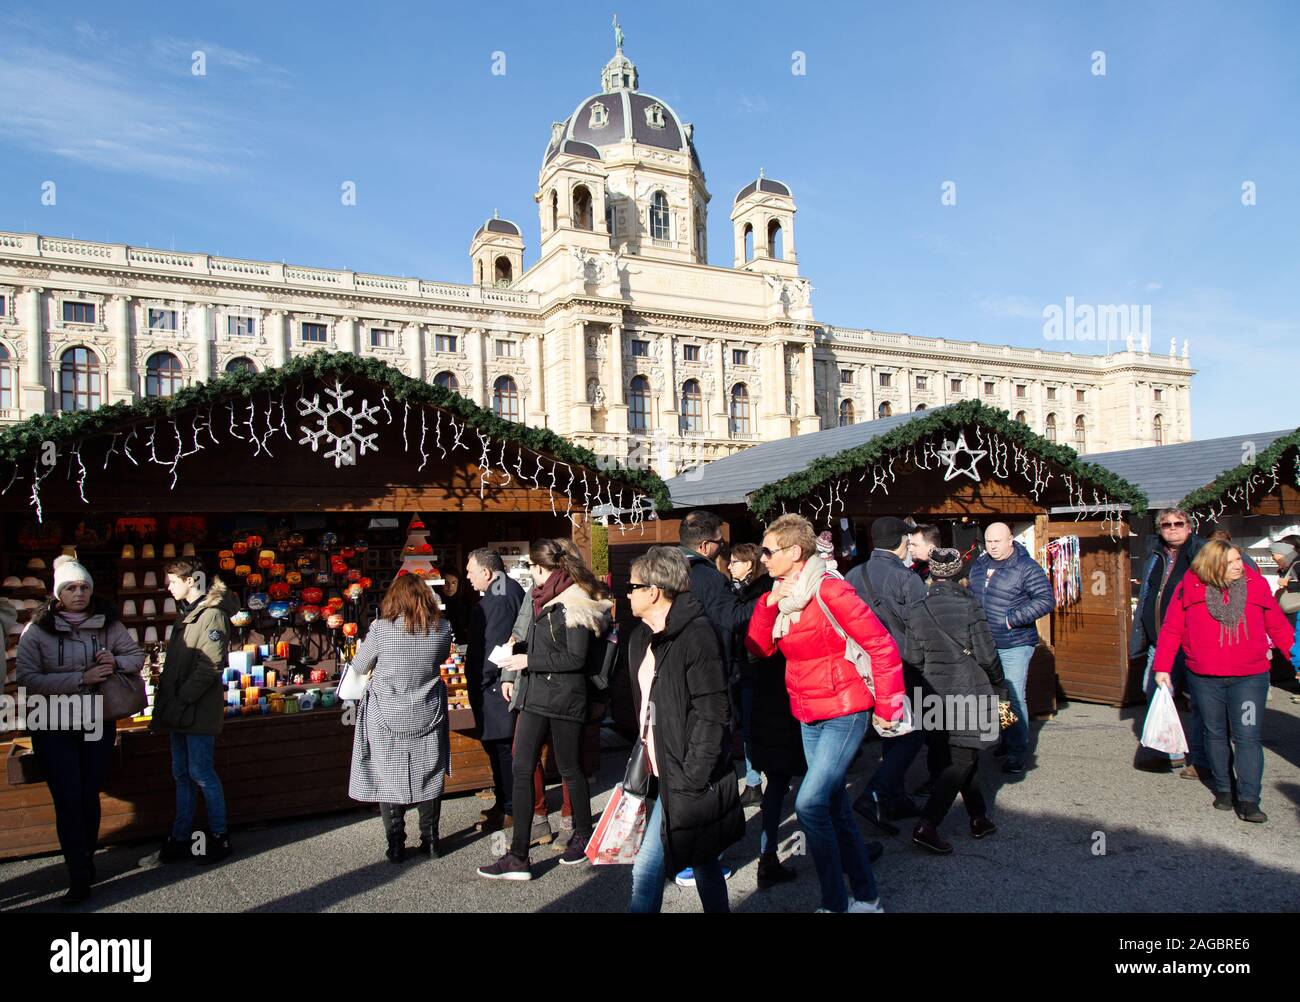 Vienna Christmas market; people shopping in daytime at the market in Maria Theresien Platz, outside the Natural History Museum, Vienna Austria Europe Stock Photo